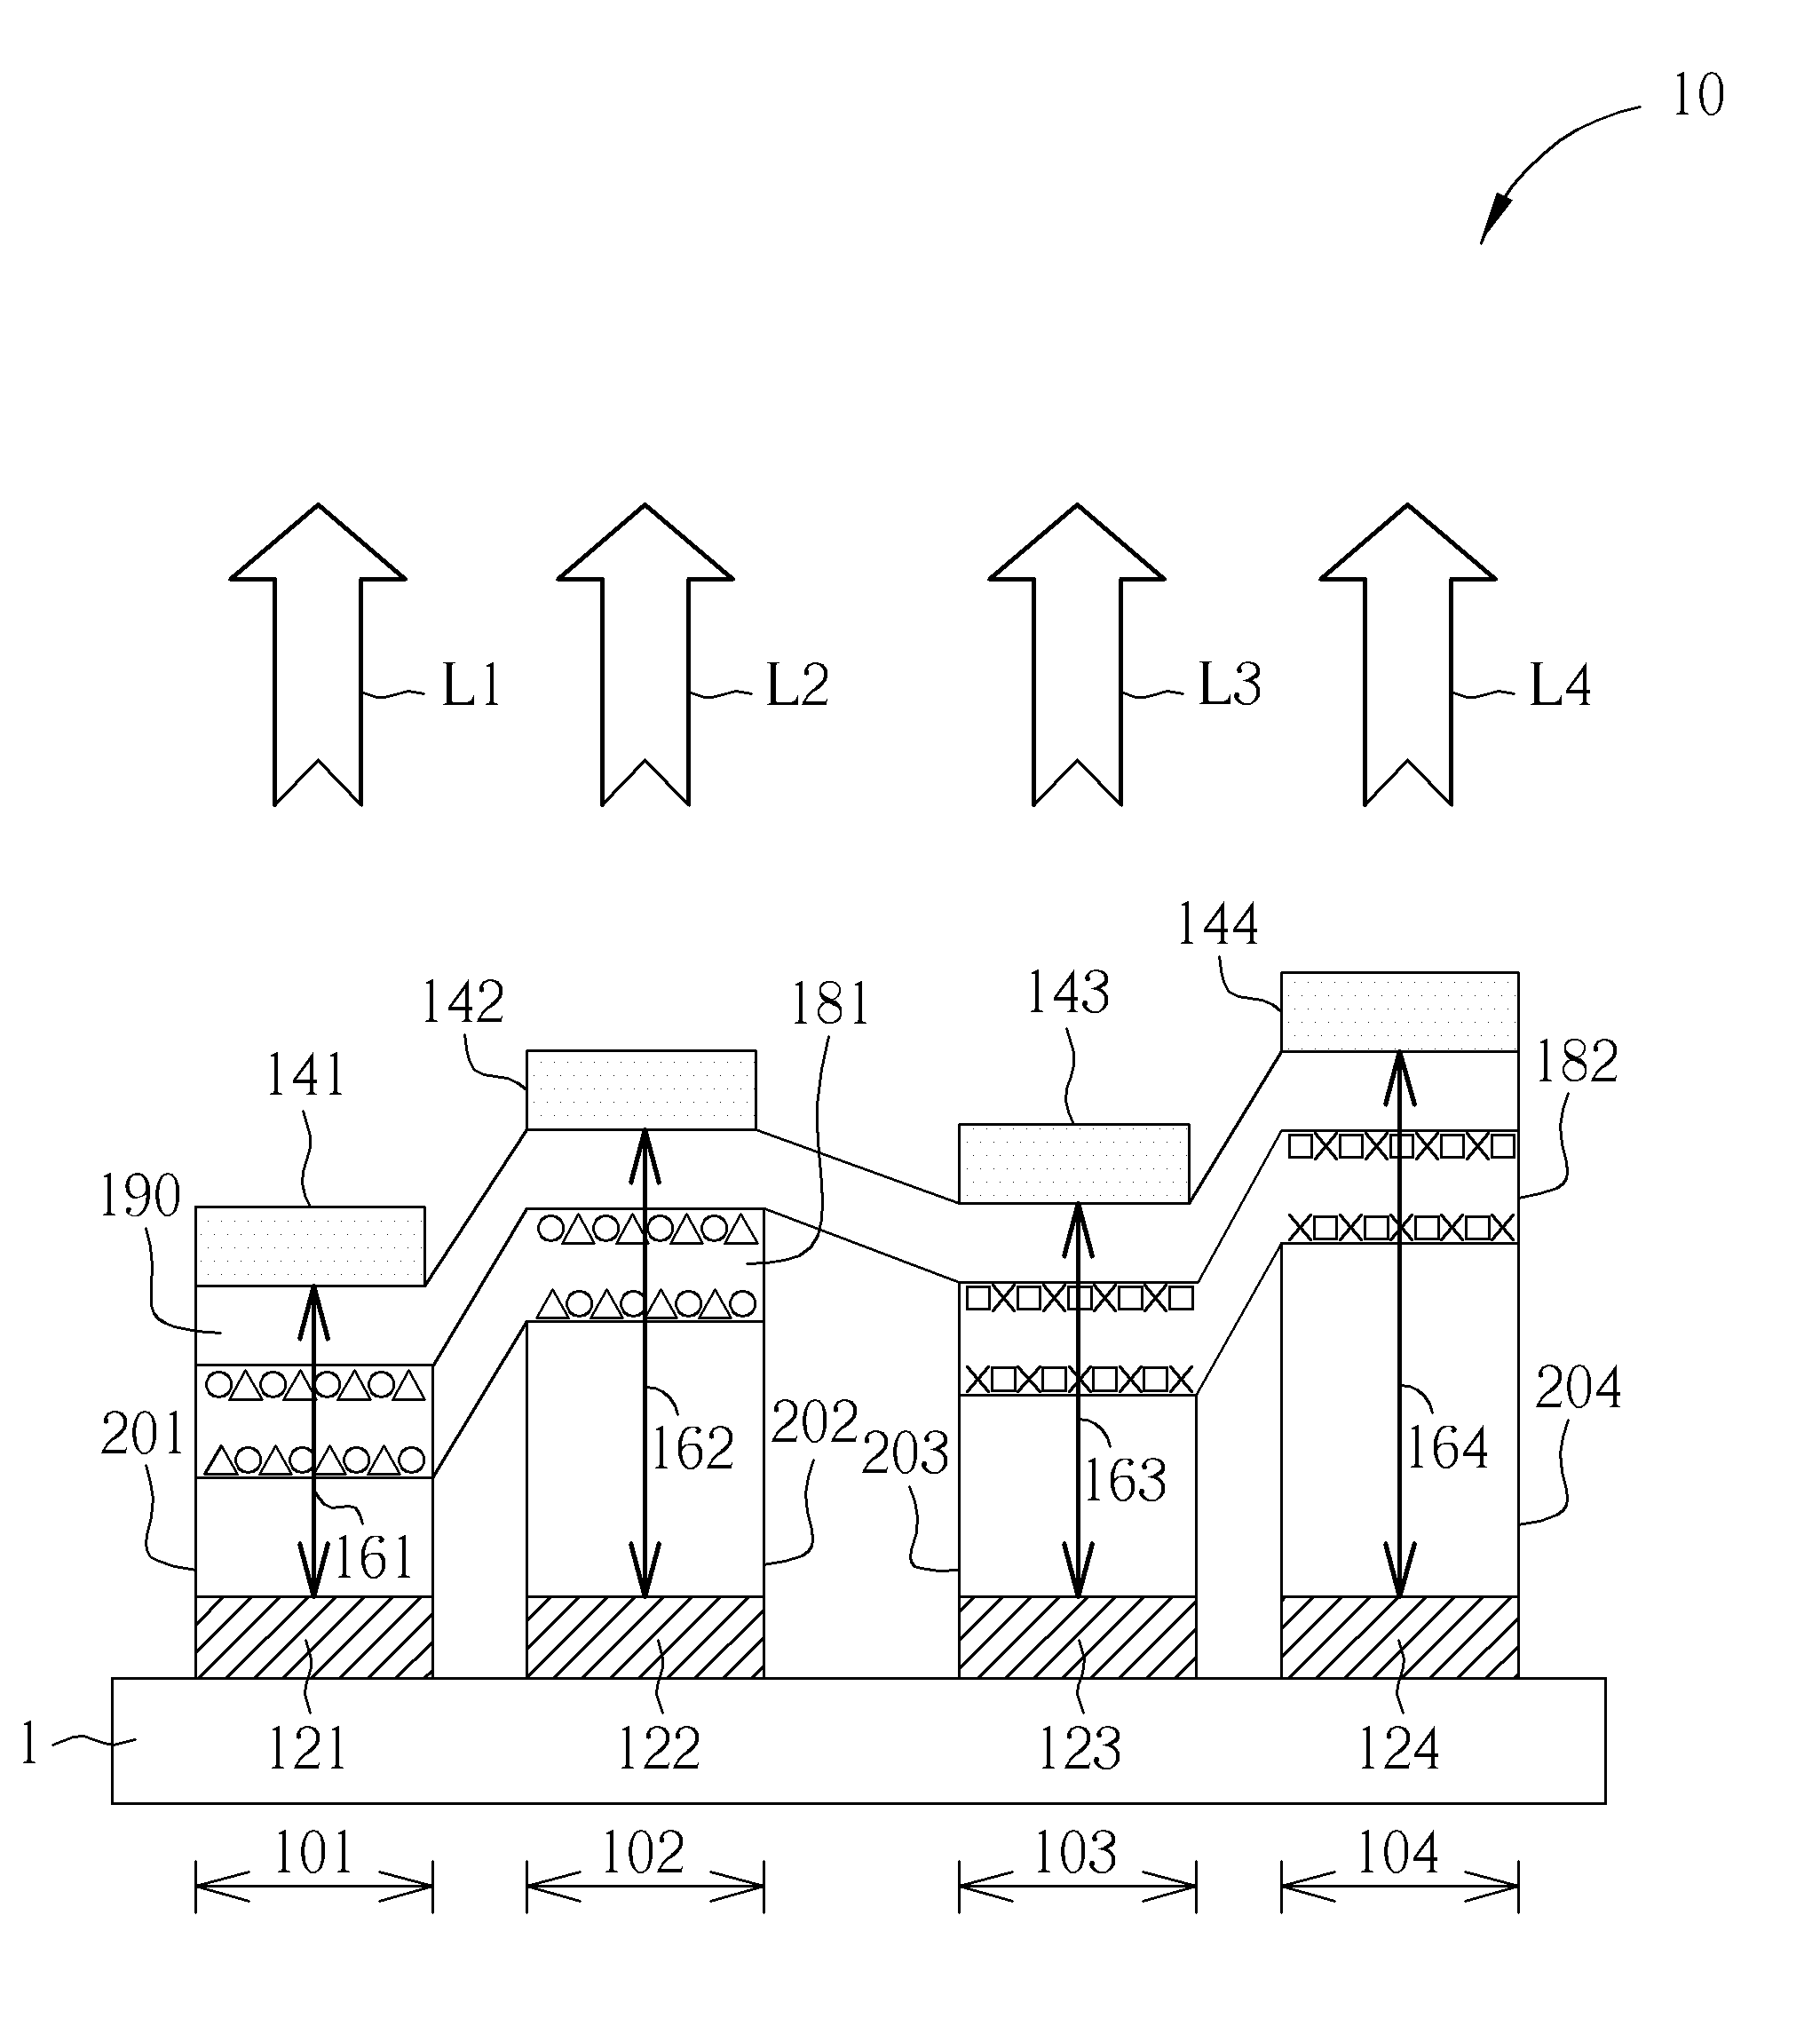 Pixel structure of an electroluminescent display panel